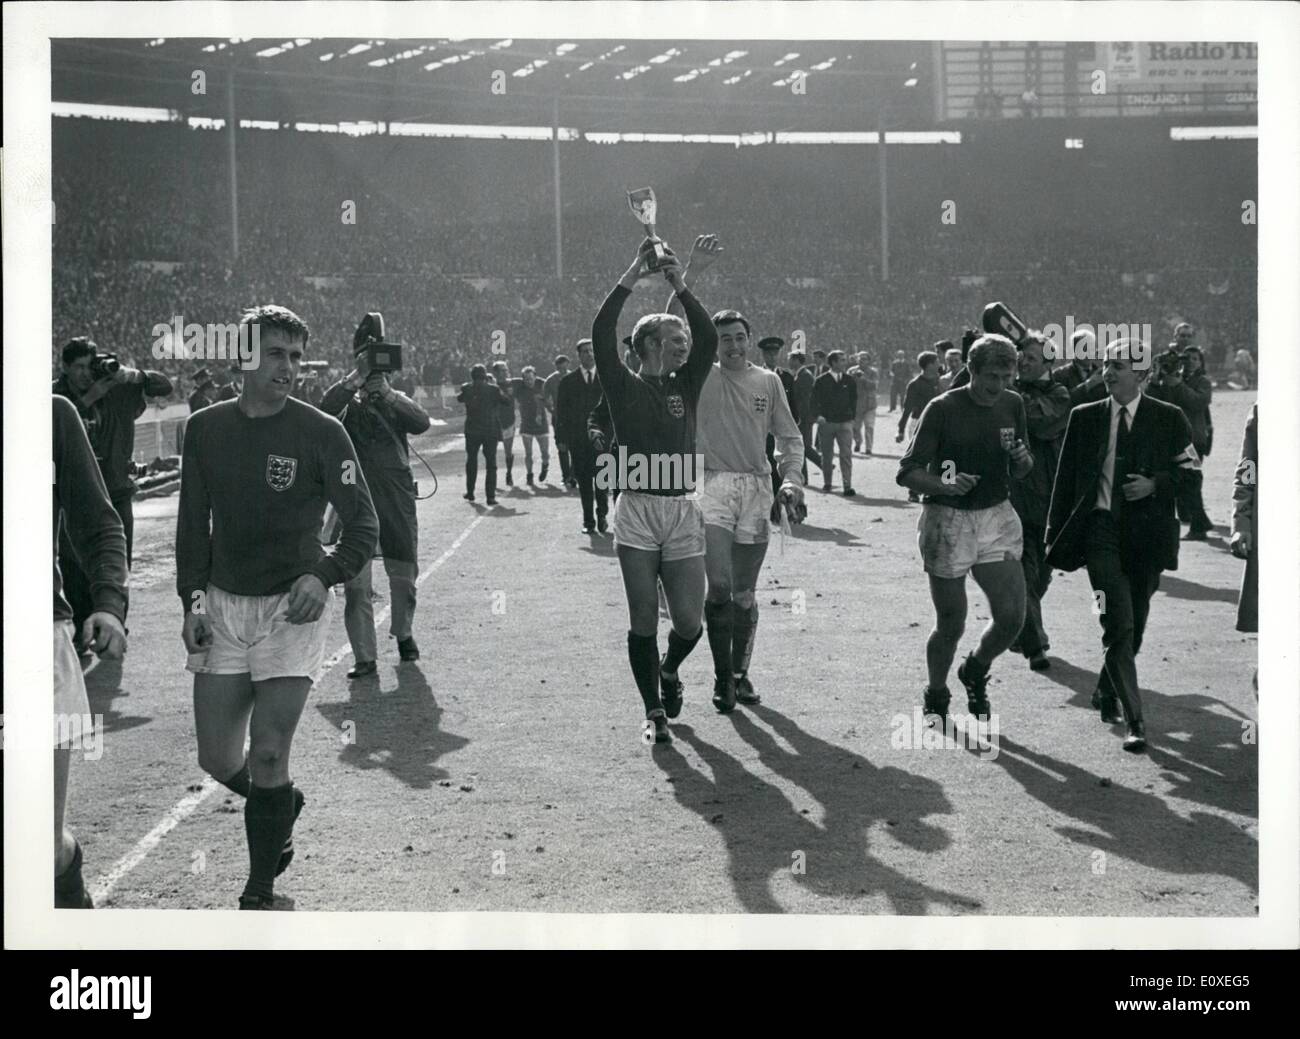 Jul. 07, 1966 - Football the 1966 World Cup. The Final England V. West Germany at Wembley Stadium. England won 4-2 after extra time.: Bobby Moore (England's Captain) leads his team around the Wembley Pitch after England's World Cup Final victory against West Germany. Stock Photo